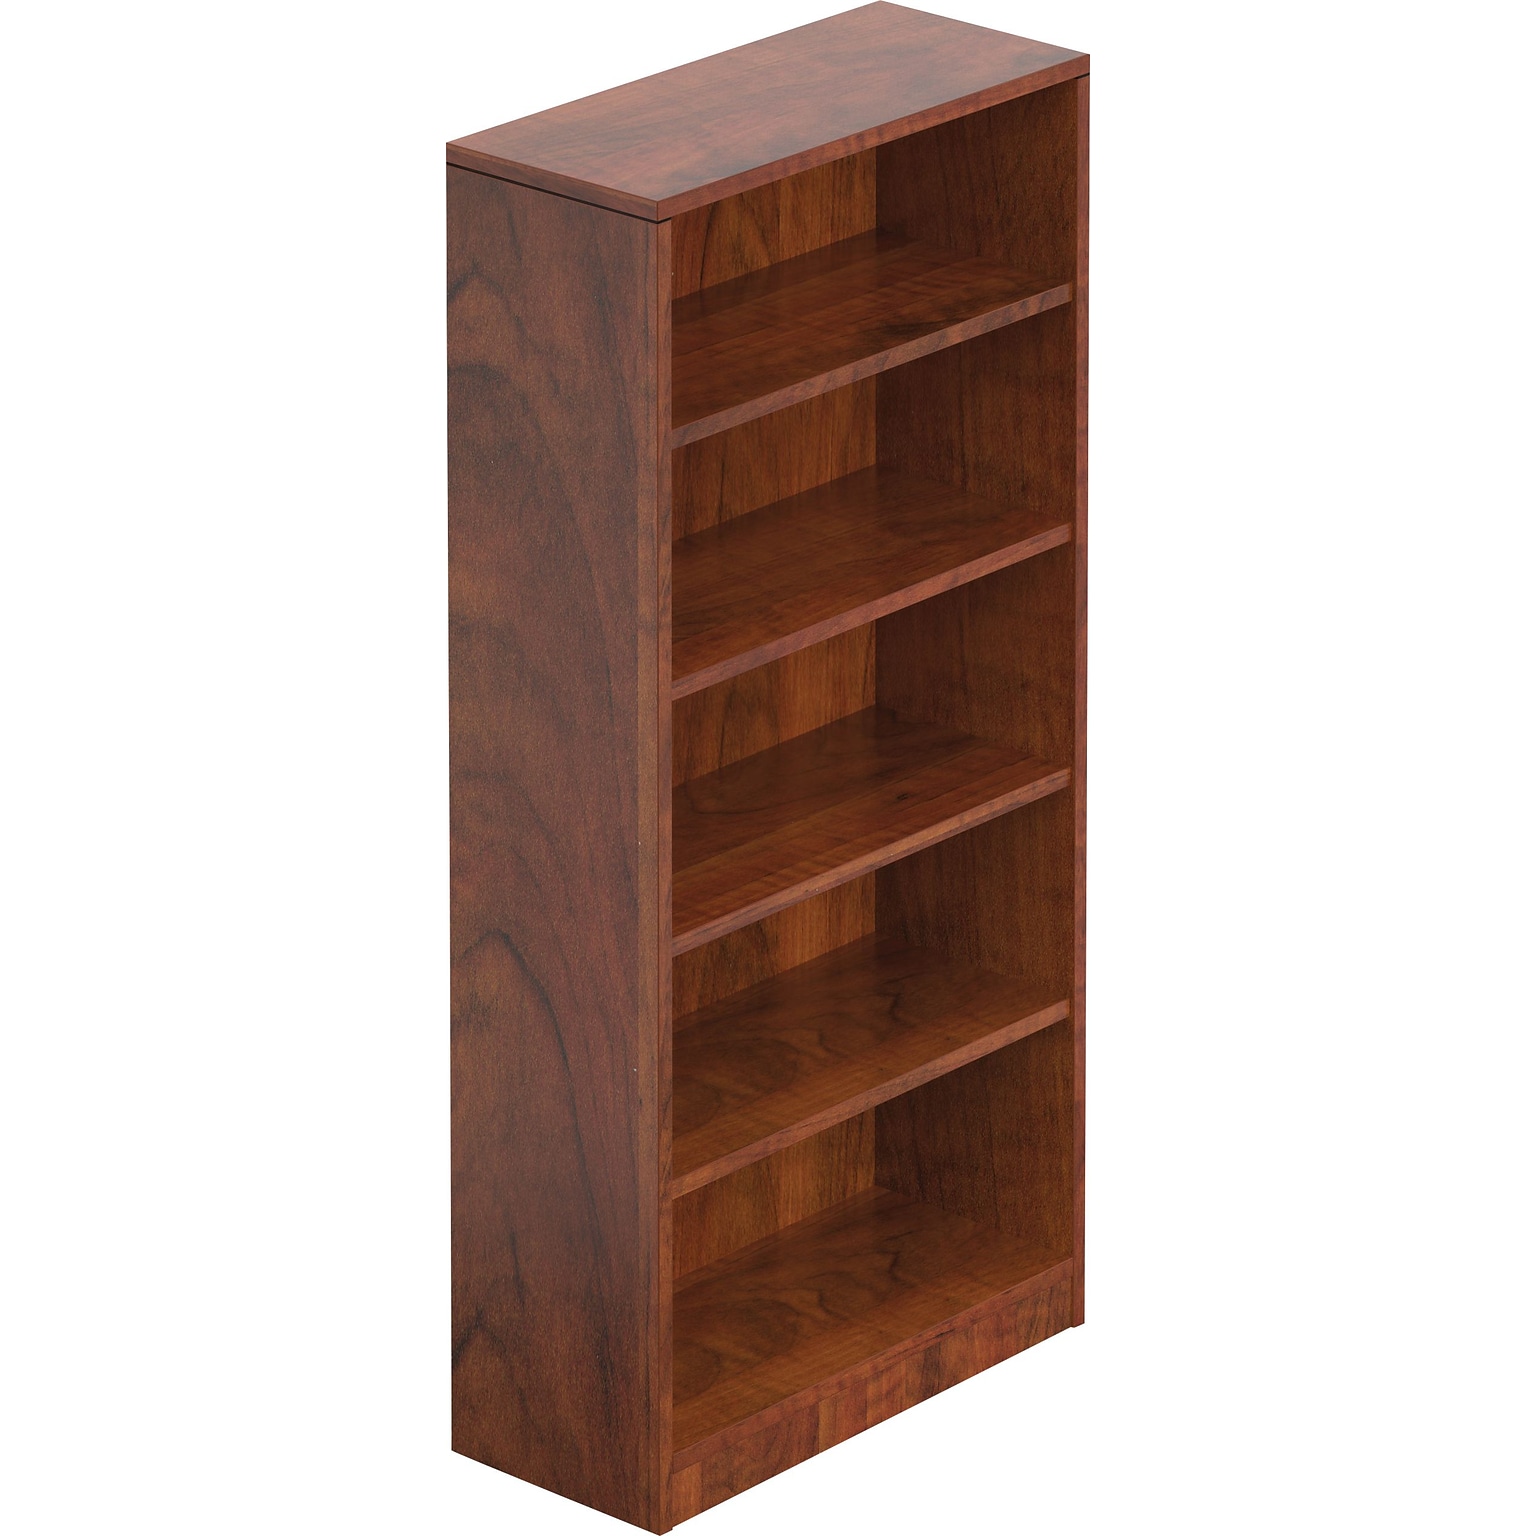 Offices to Go Superior Laminate 71H 4-Shelf Bookcase with Adjustable Shelves, American Dark Cherry (TDSL71BC-ADC)